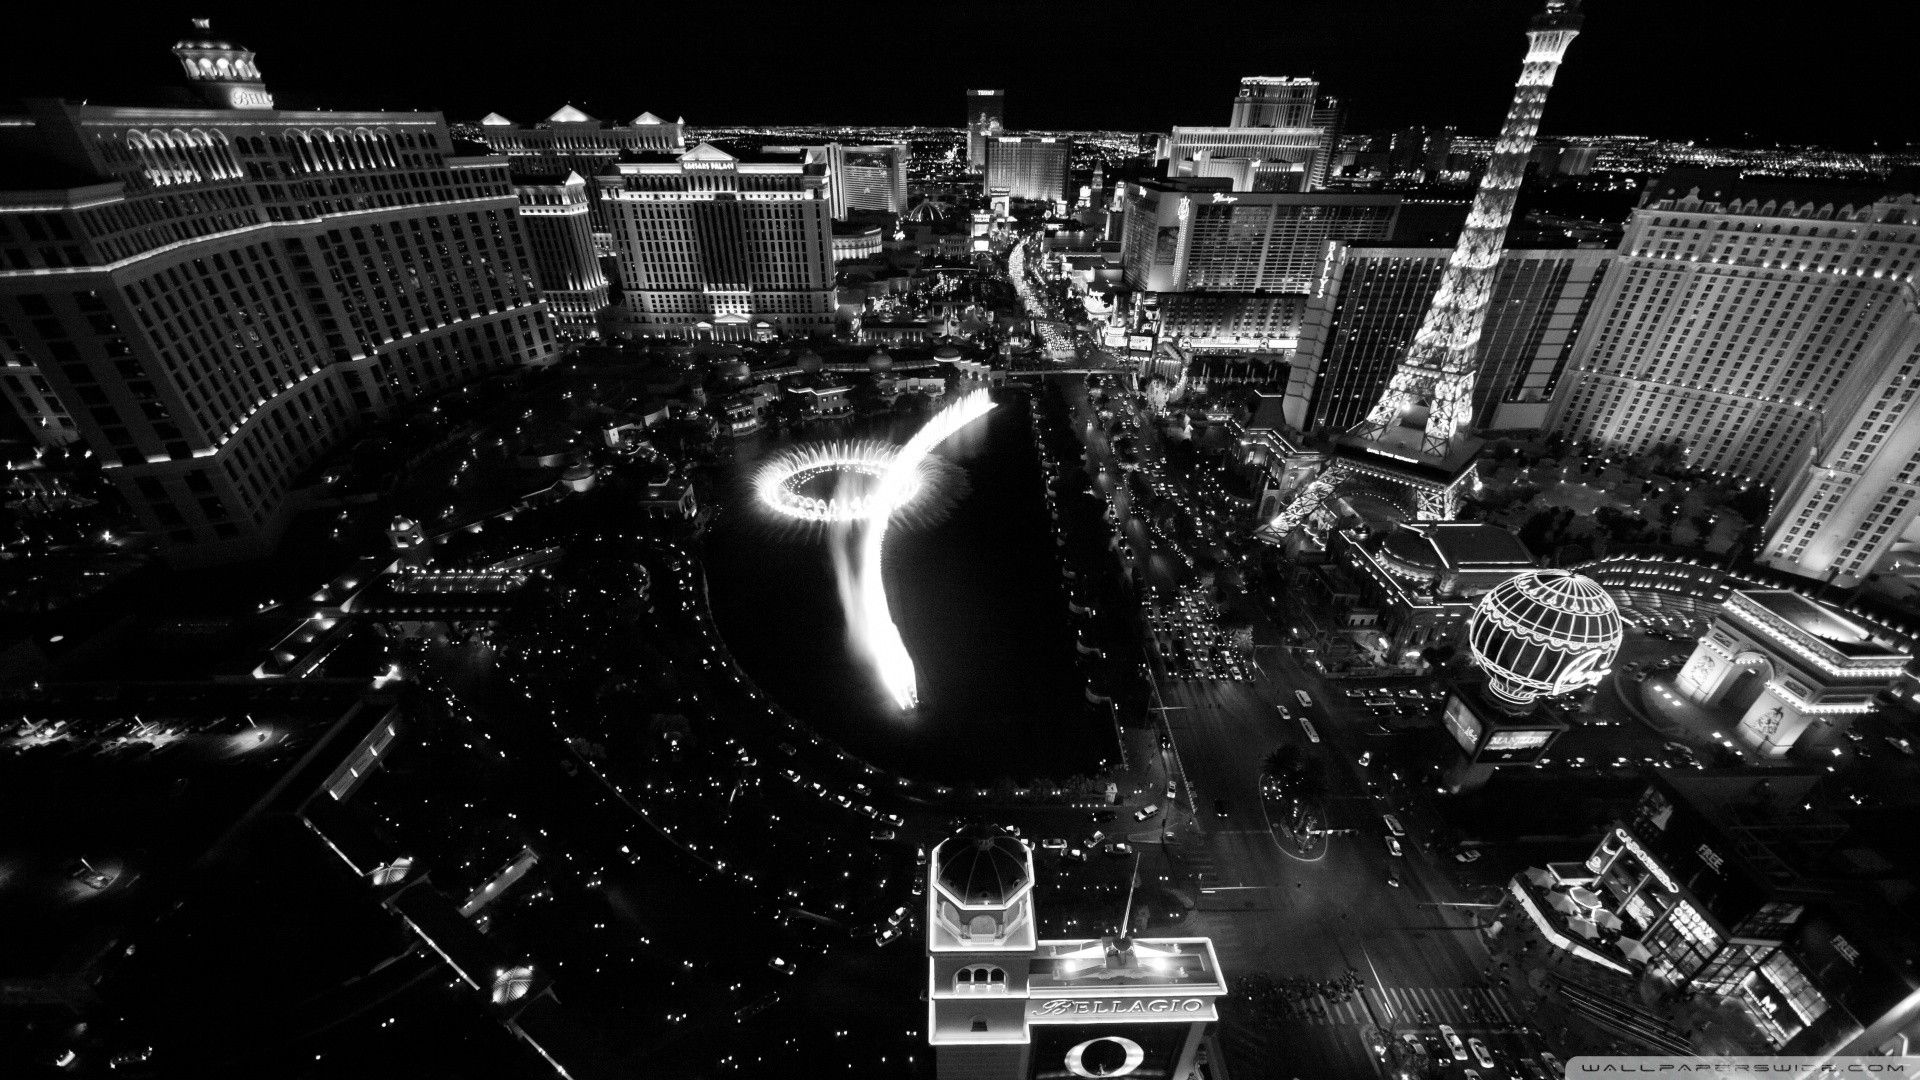 The strip at night in black and white - Las Vegas